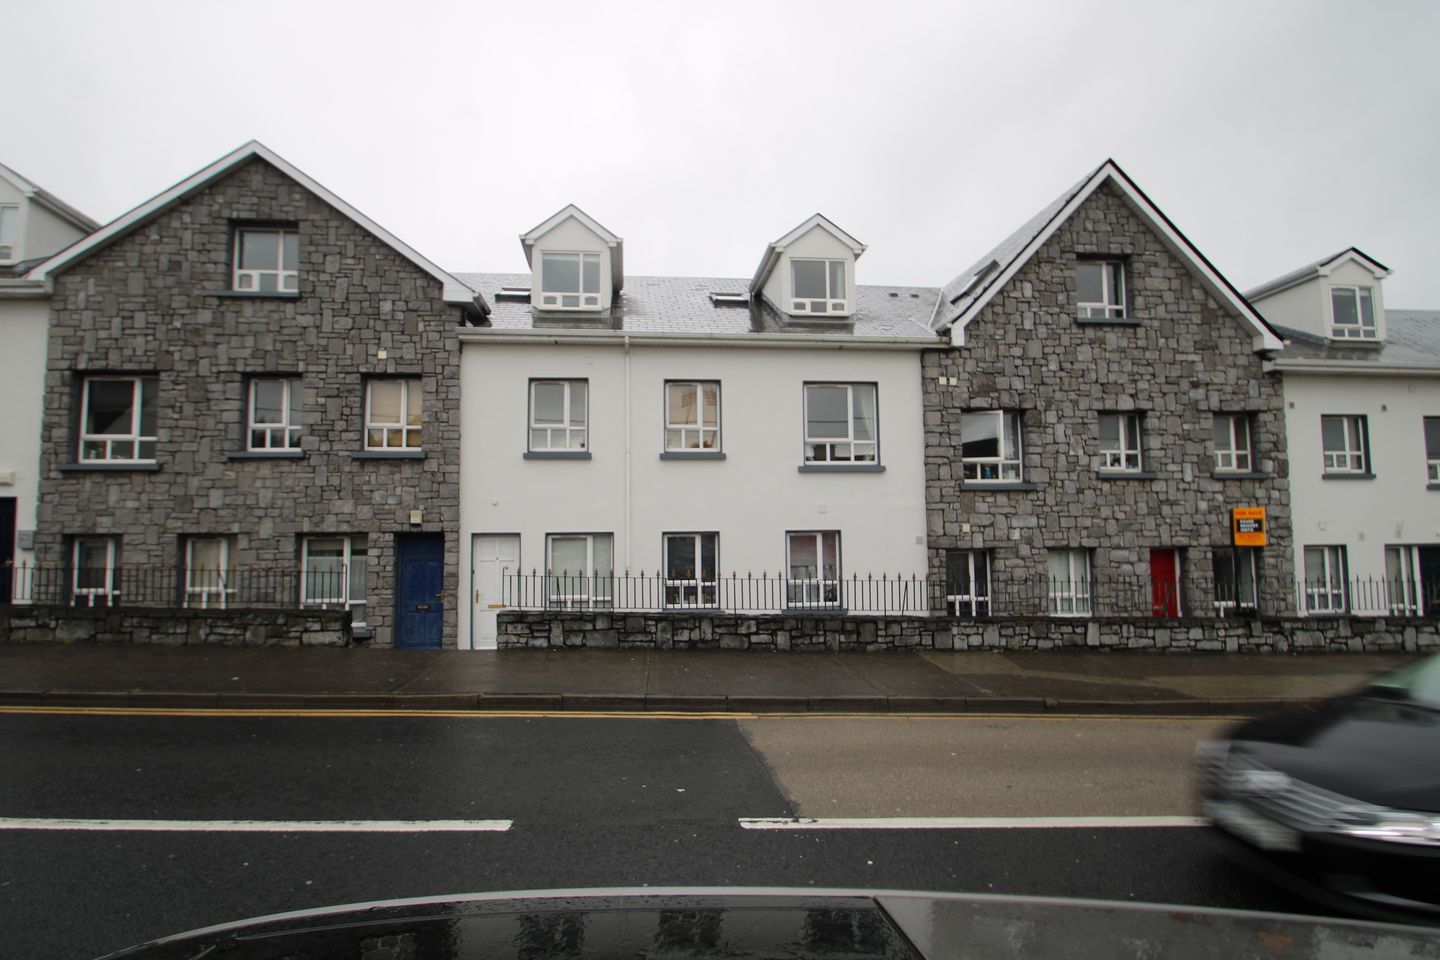 Apartment 24, Larnach, Galway City, Co. Galway